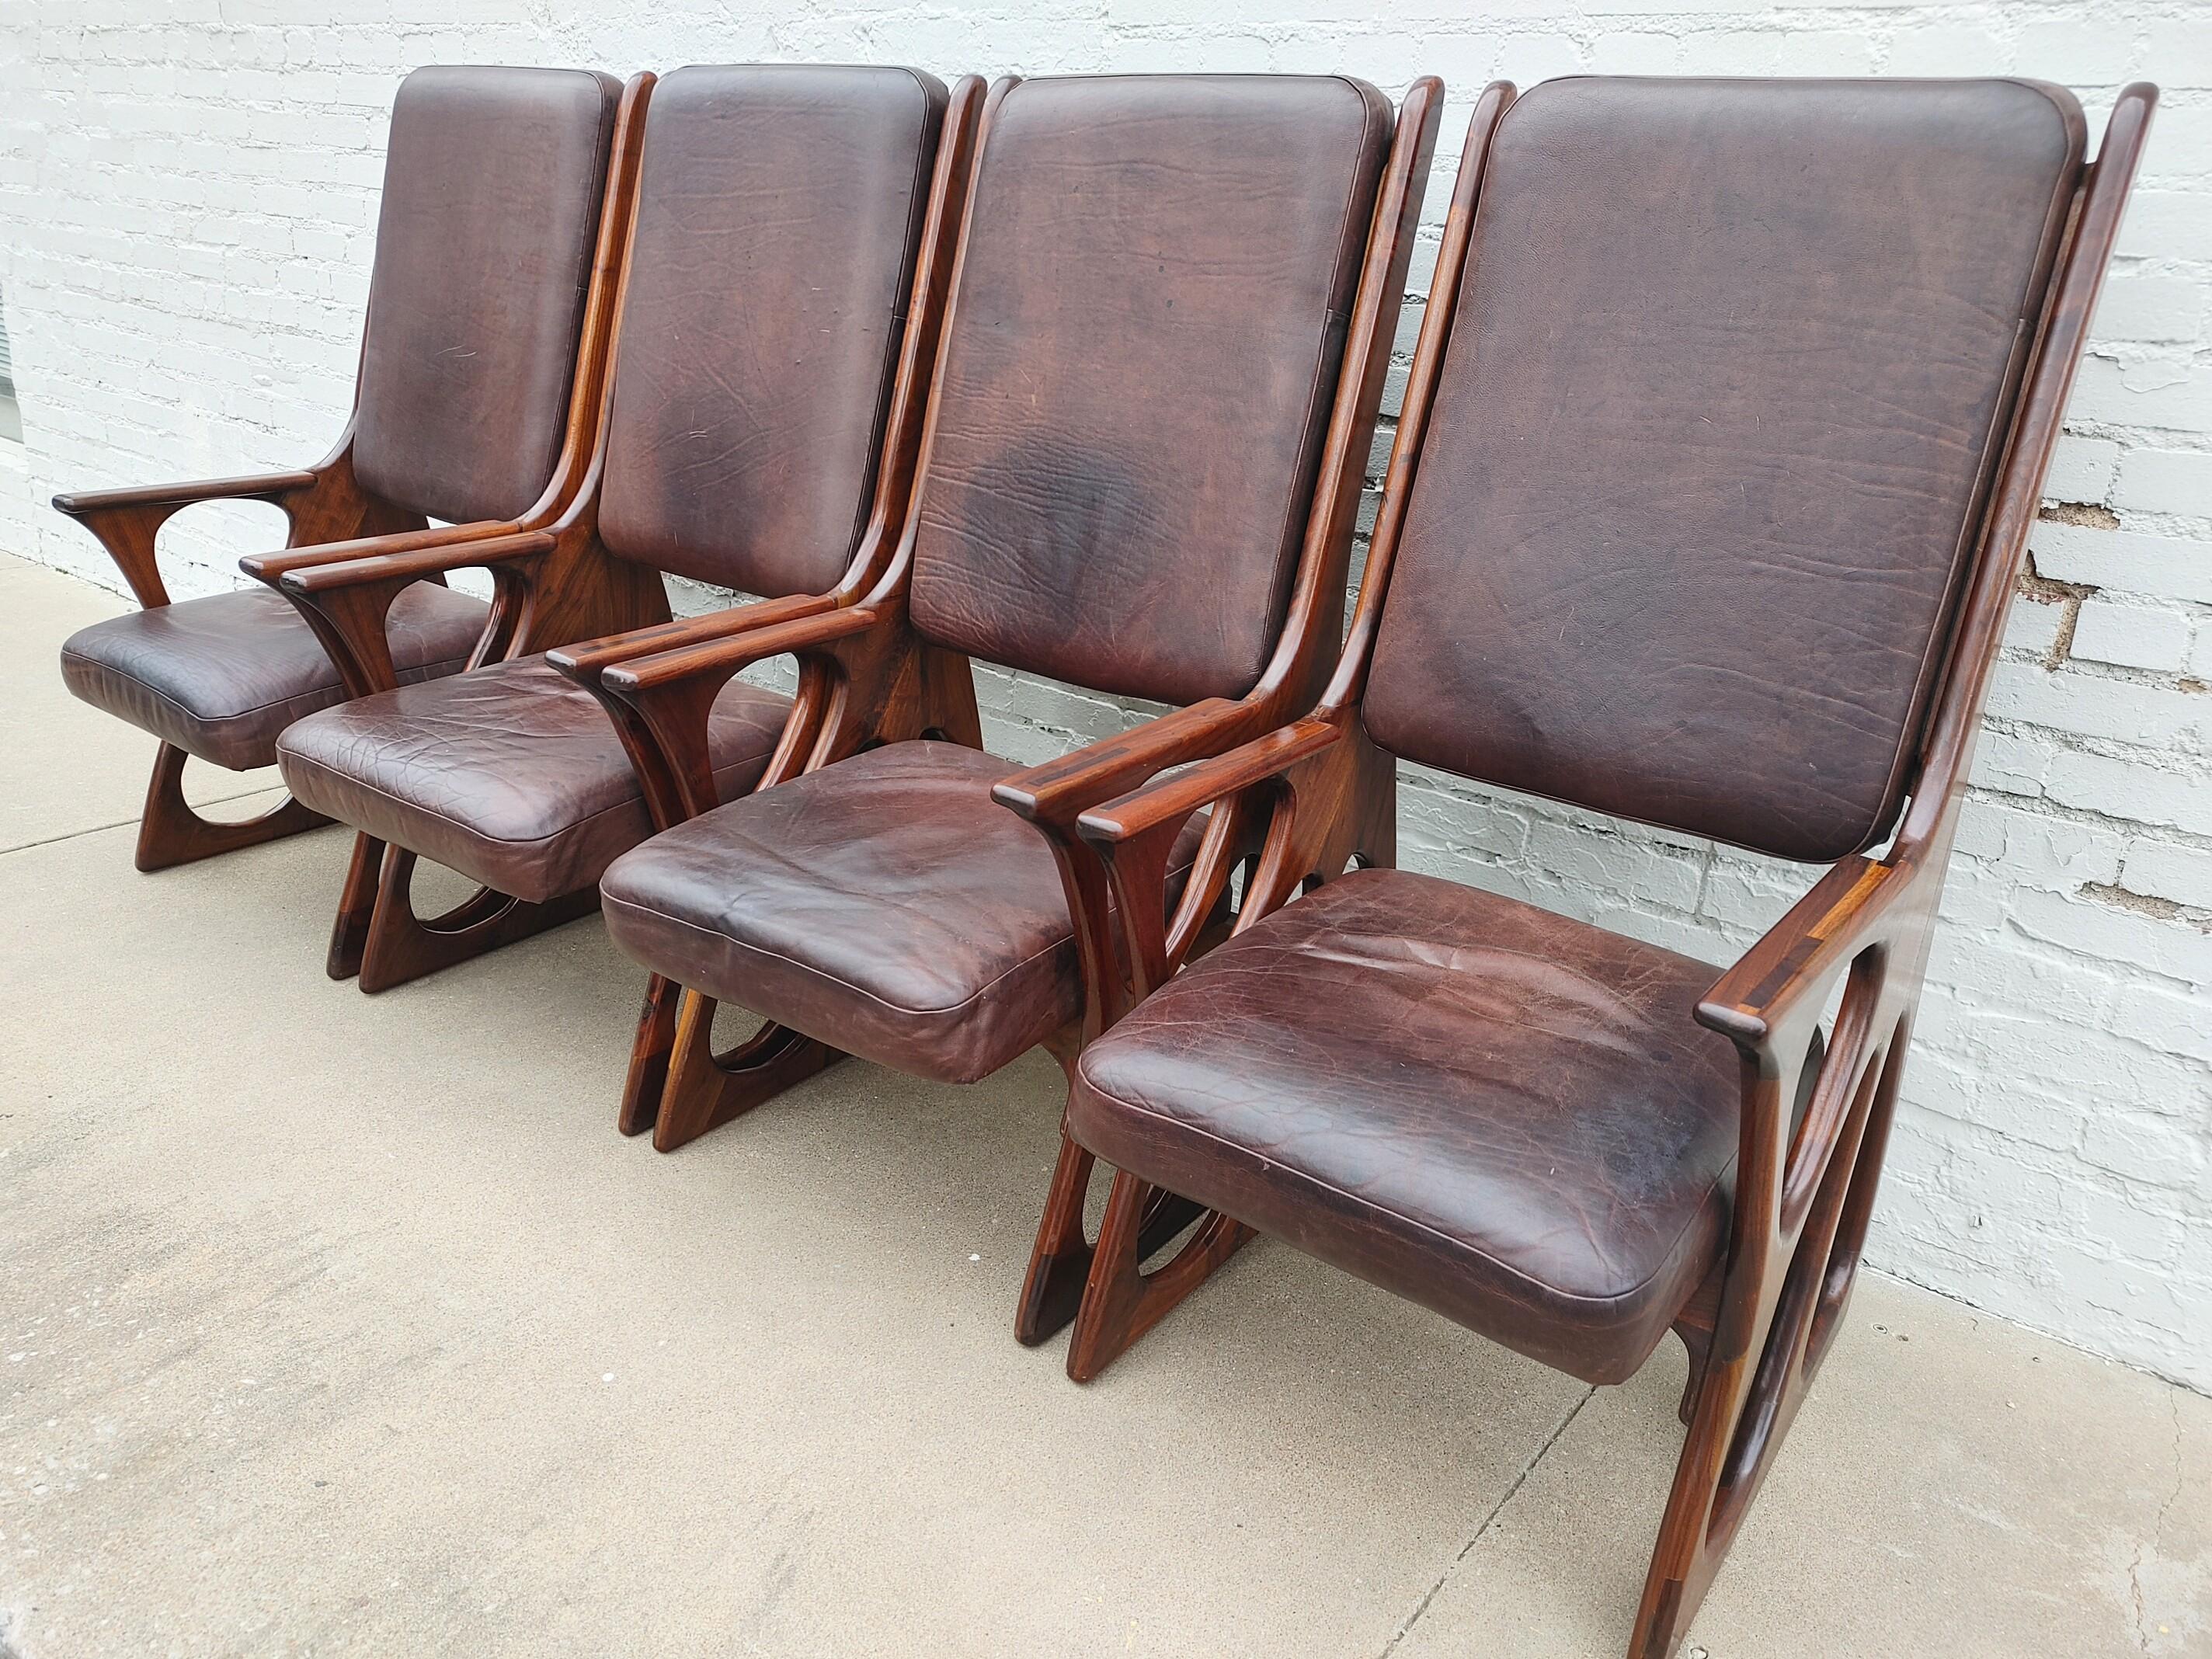 American Studio Craft Wendell Castle Inspired Chairs For Sale 3